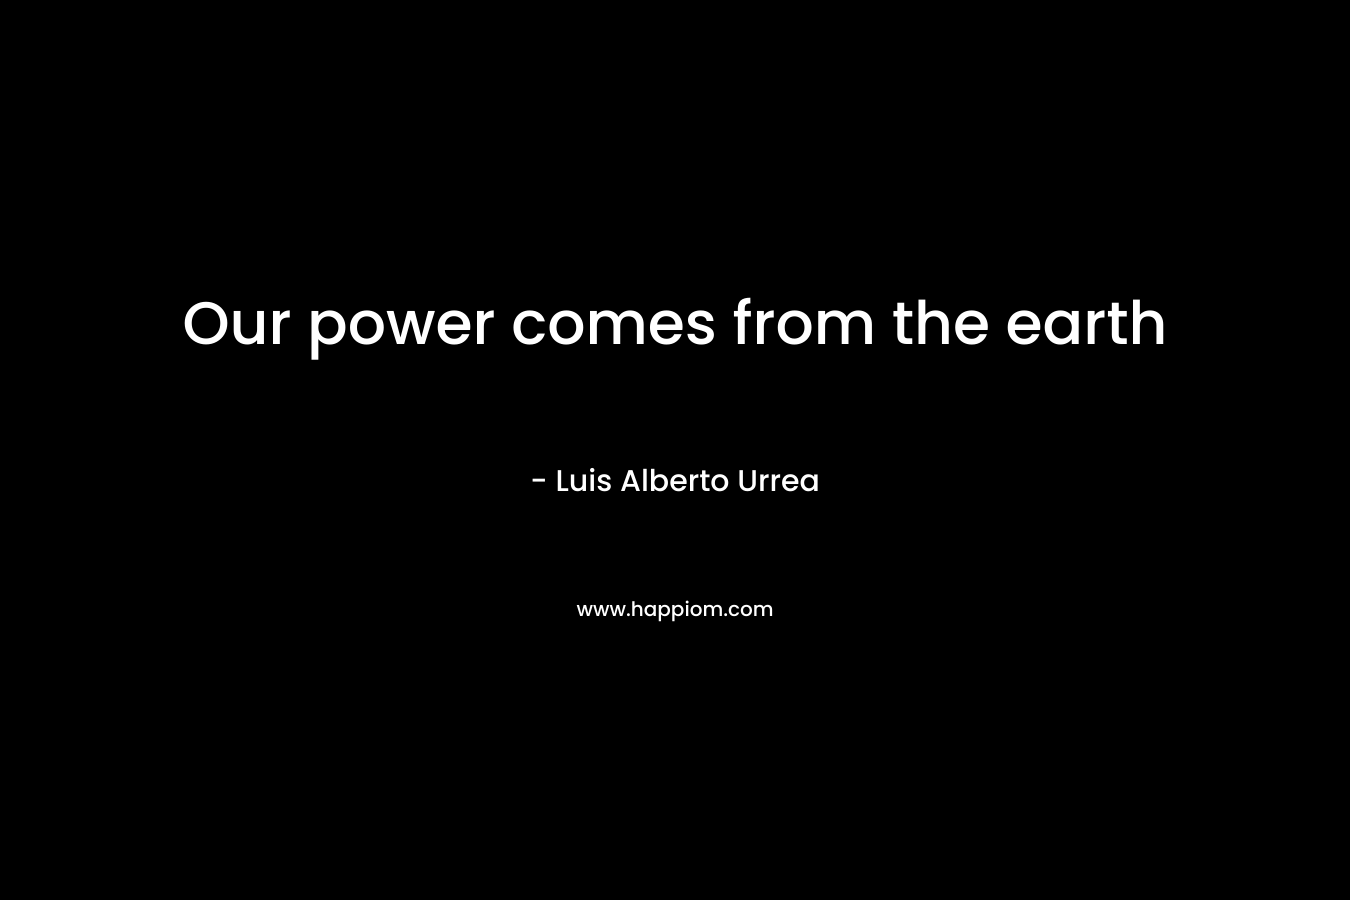 Our power comes from the earth